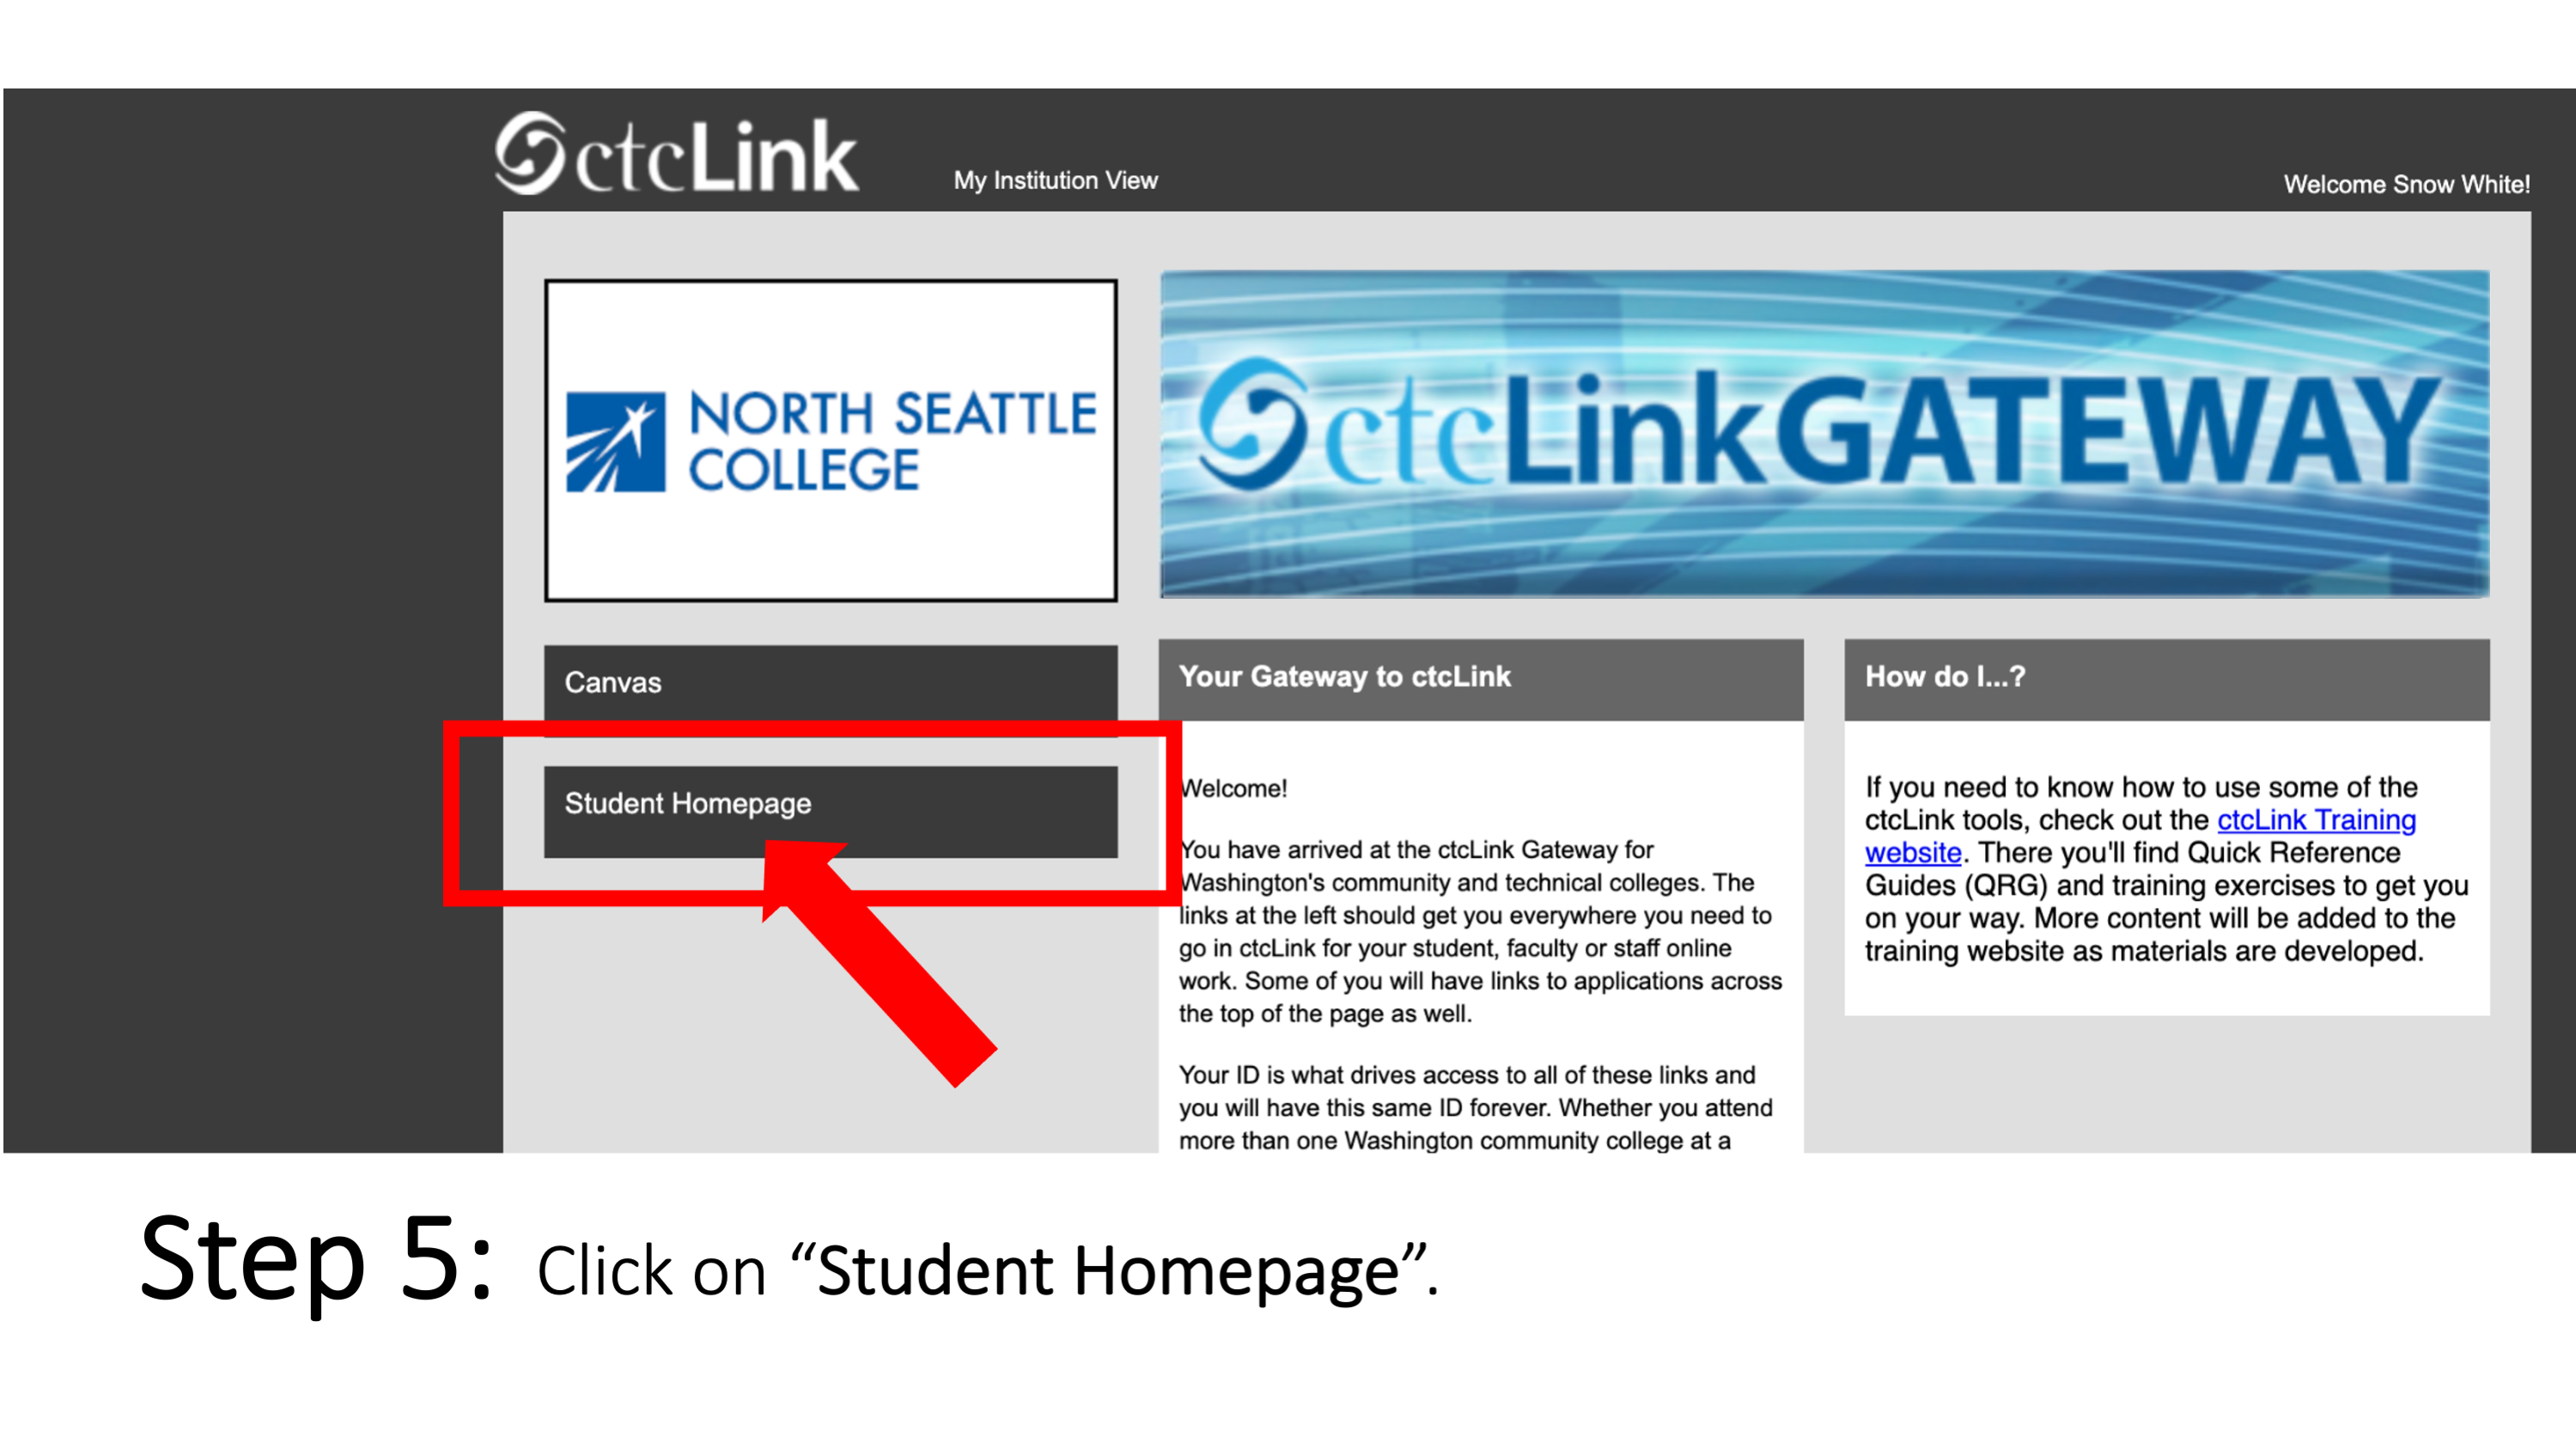 Step 5: Click on “Student Homepage”.